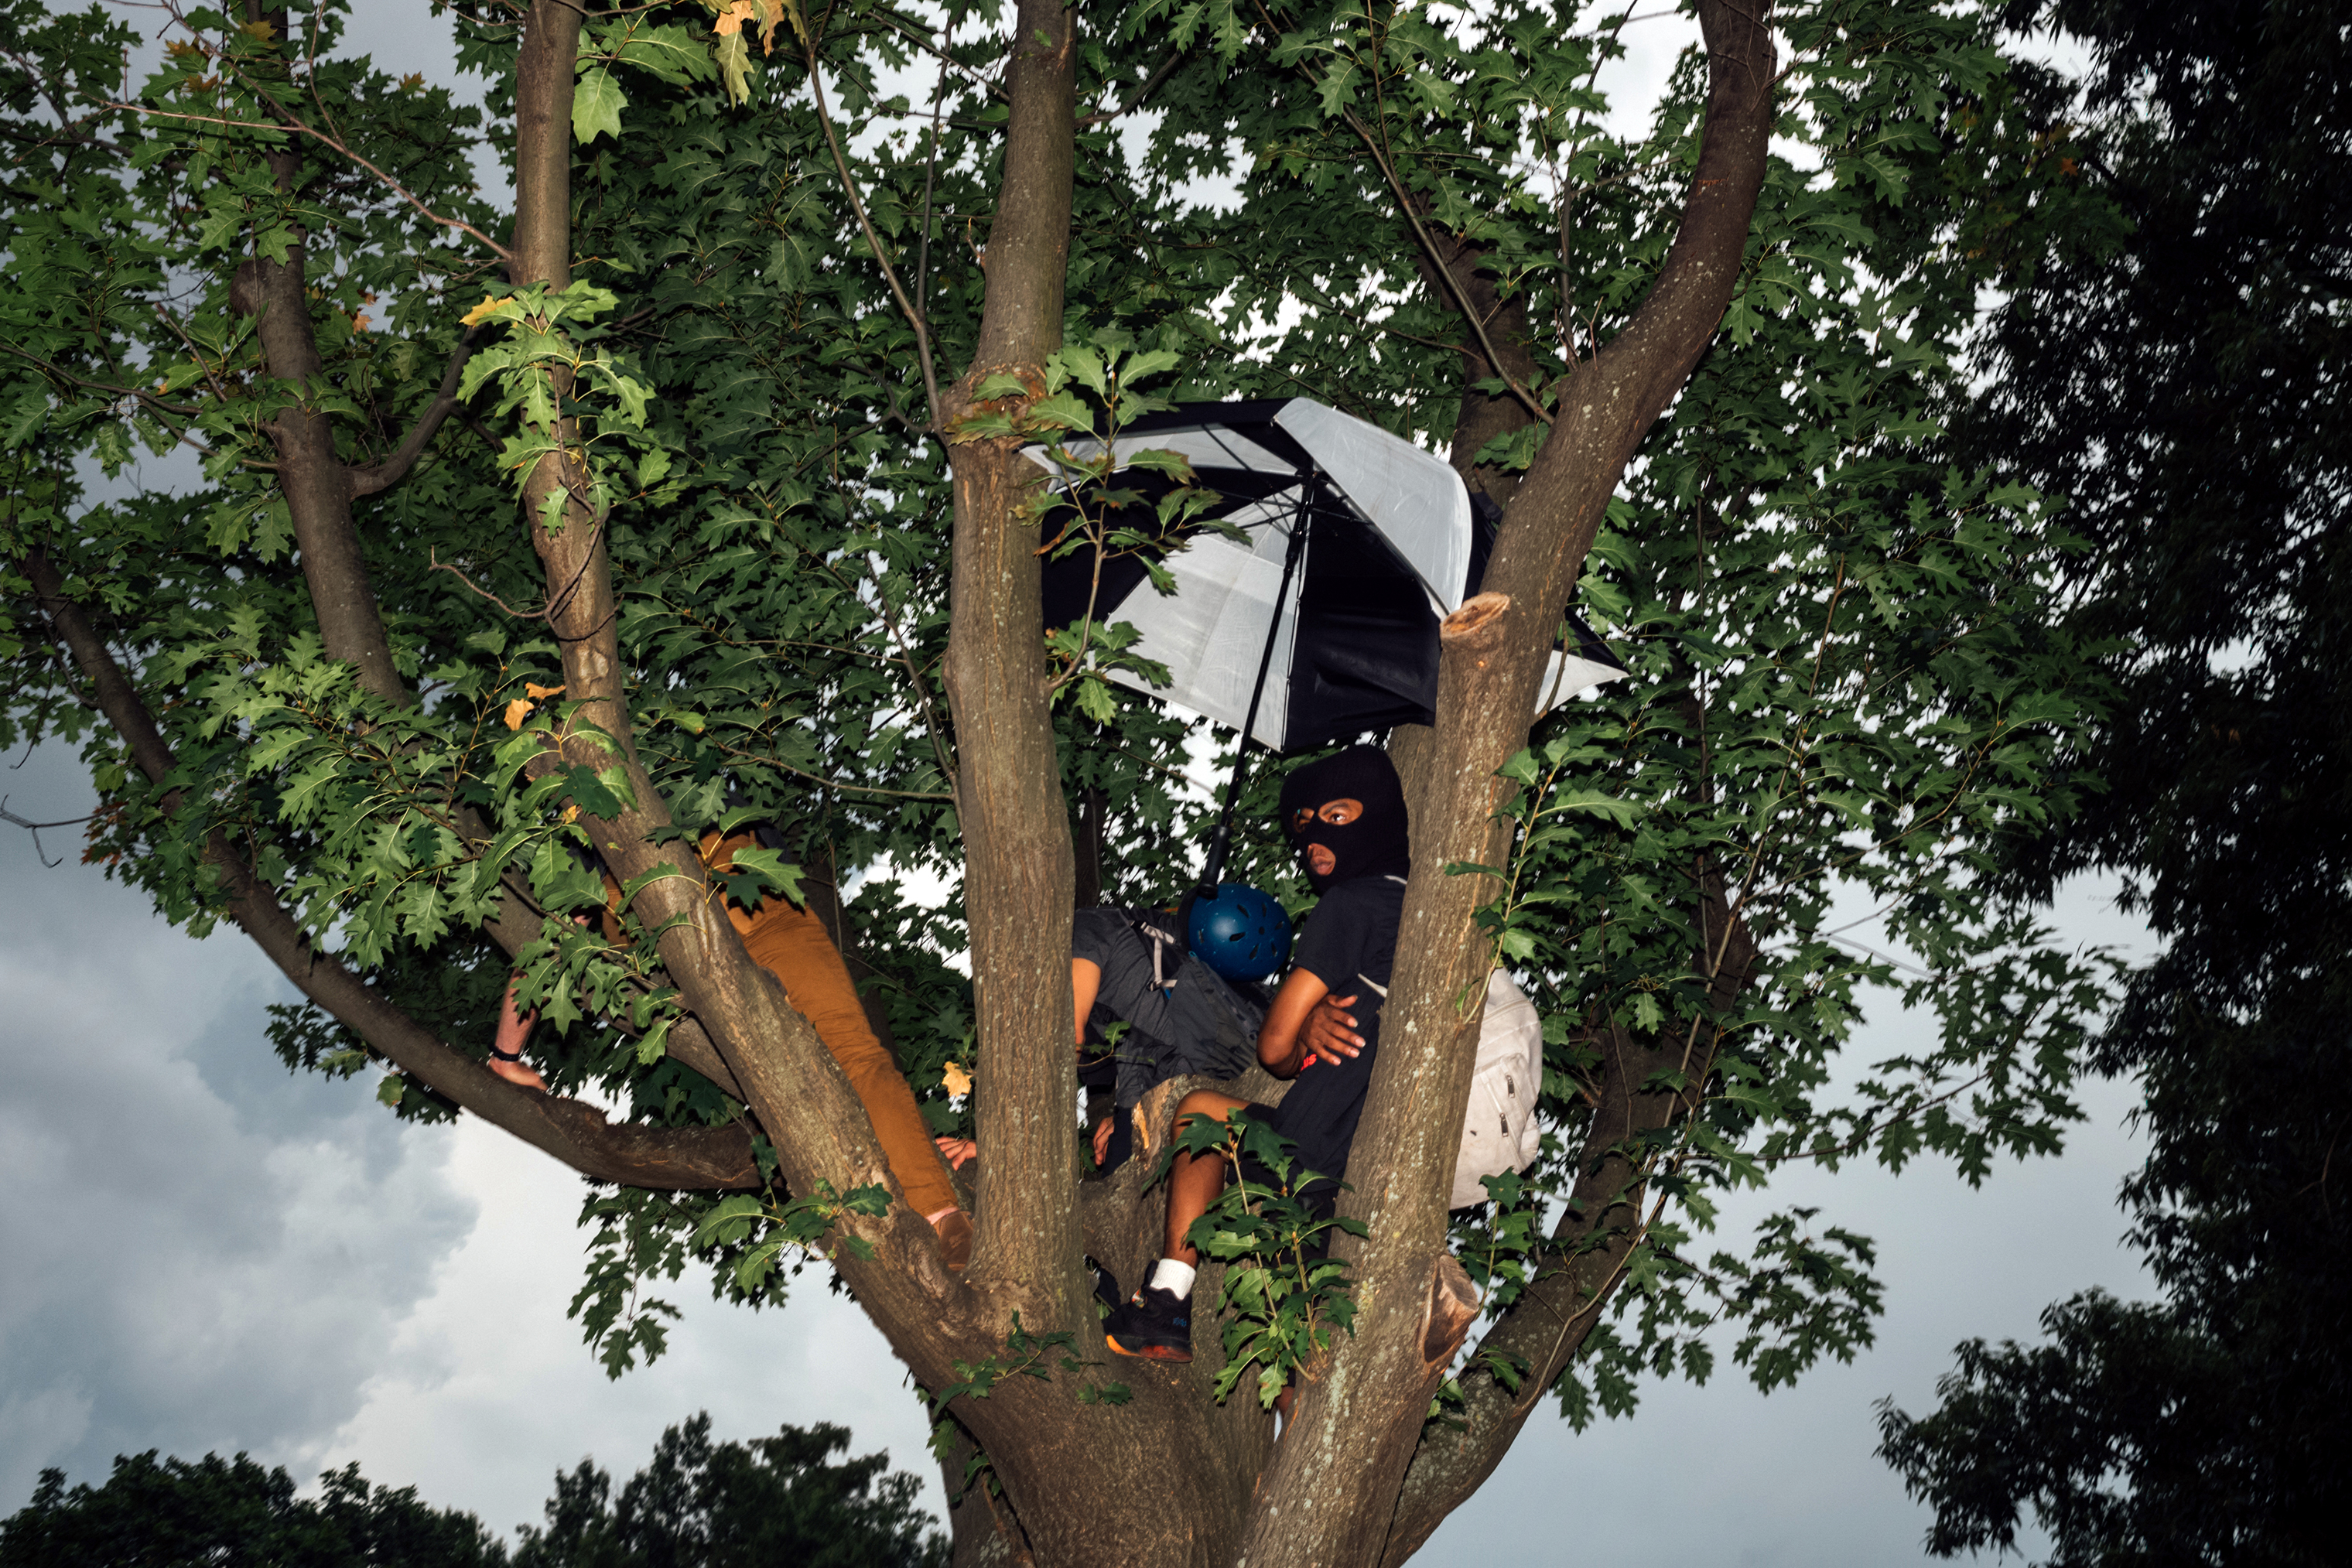 A group of counter-protesters sit in a tree. (Daniel Arnold for TIME)